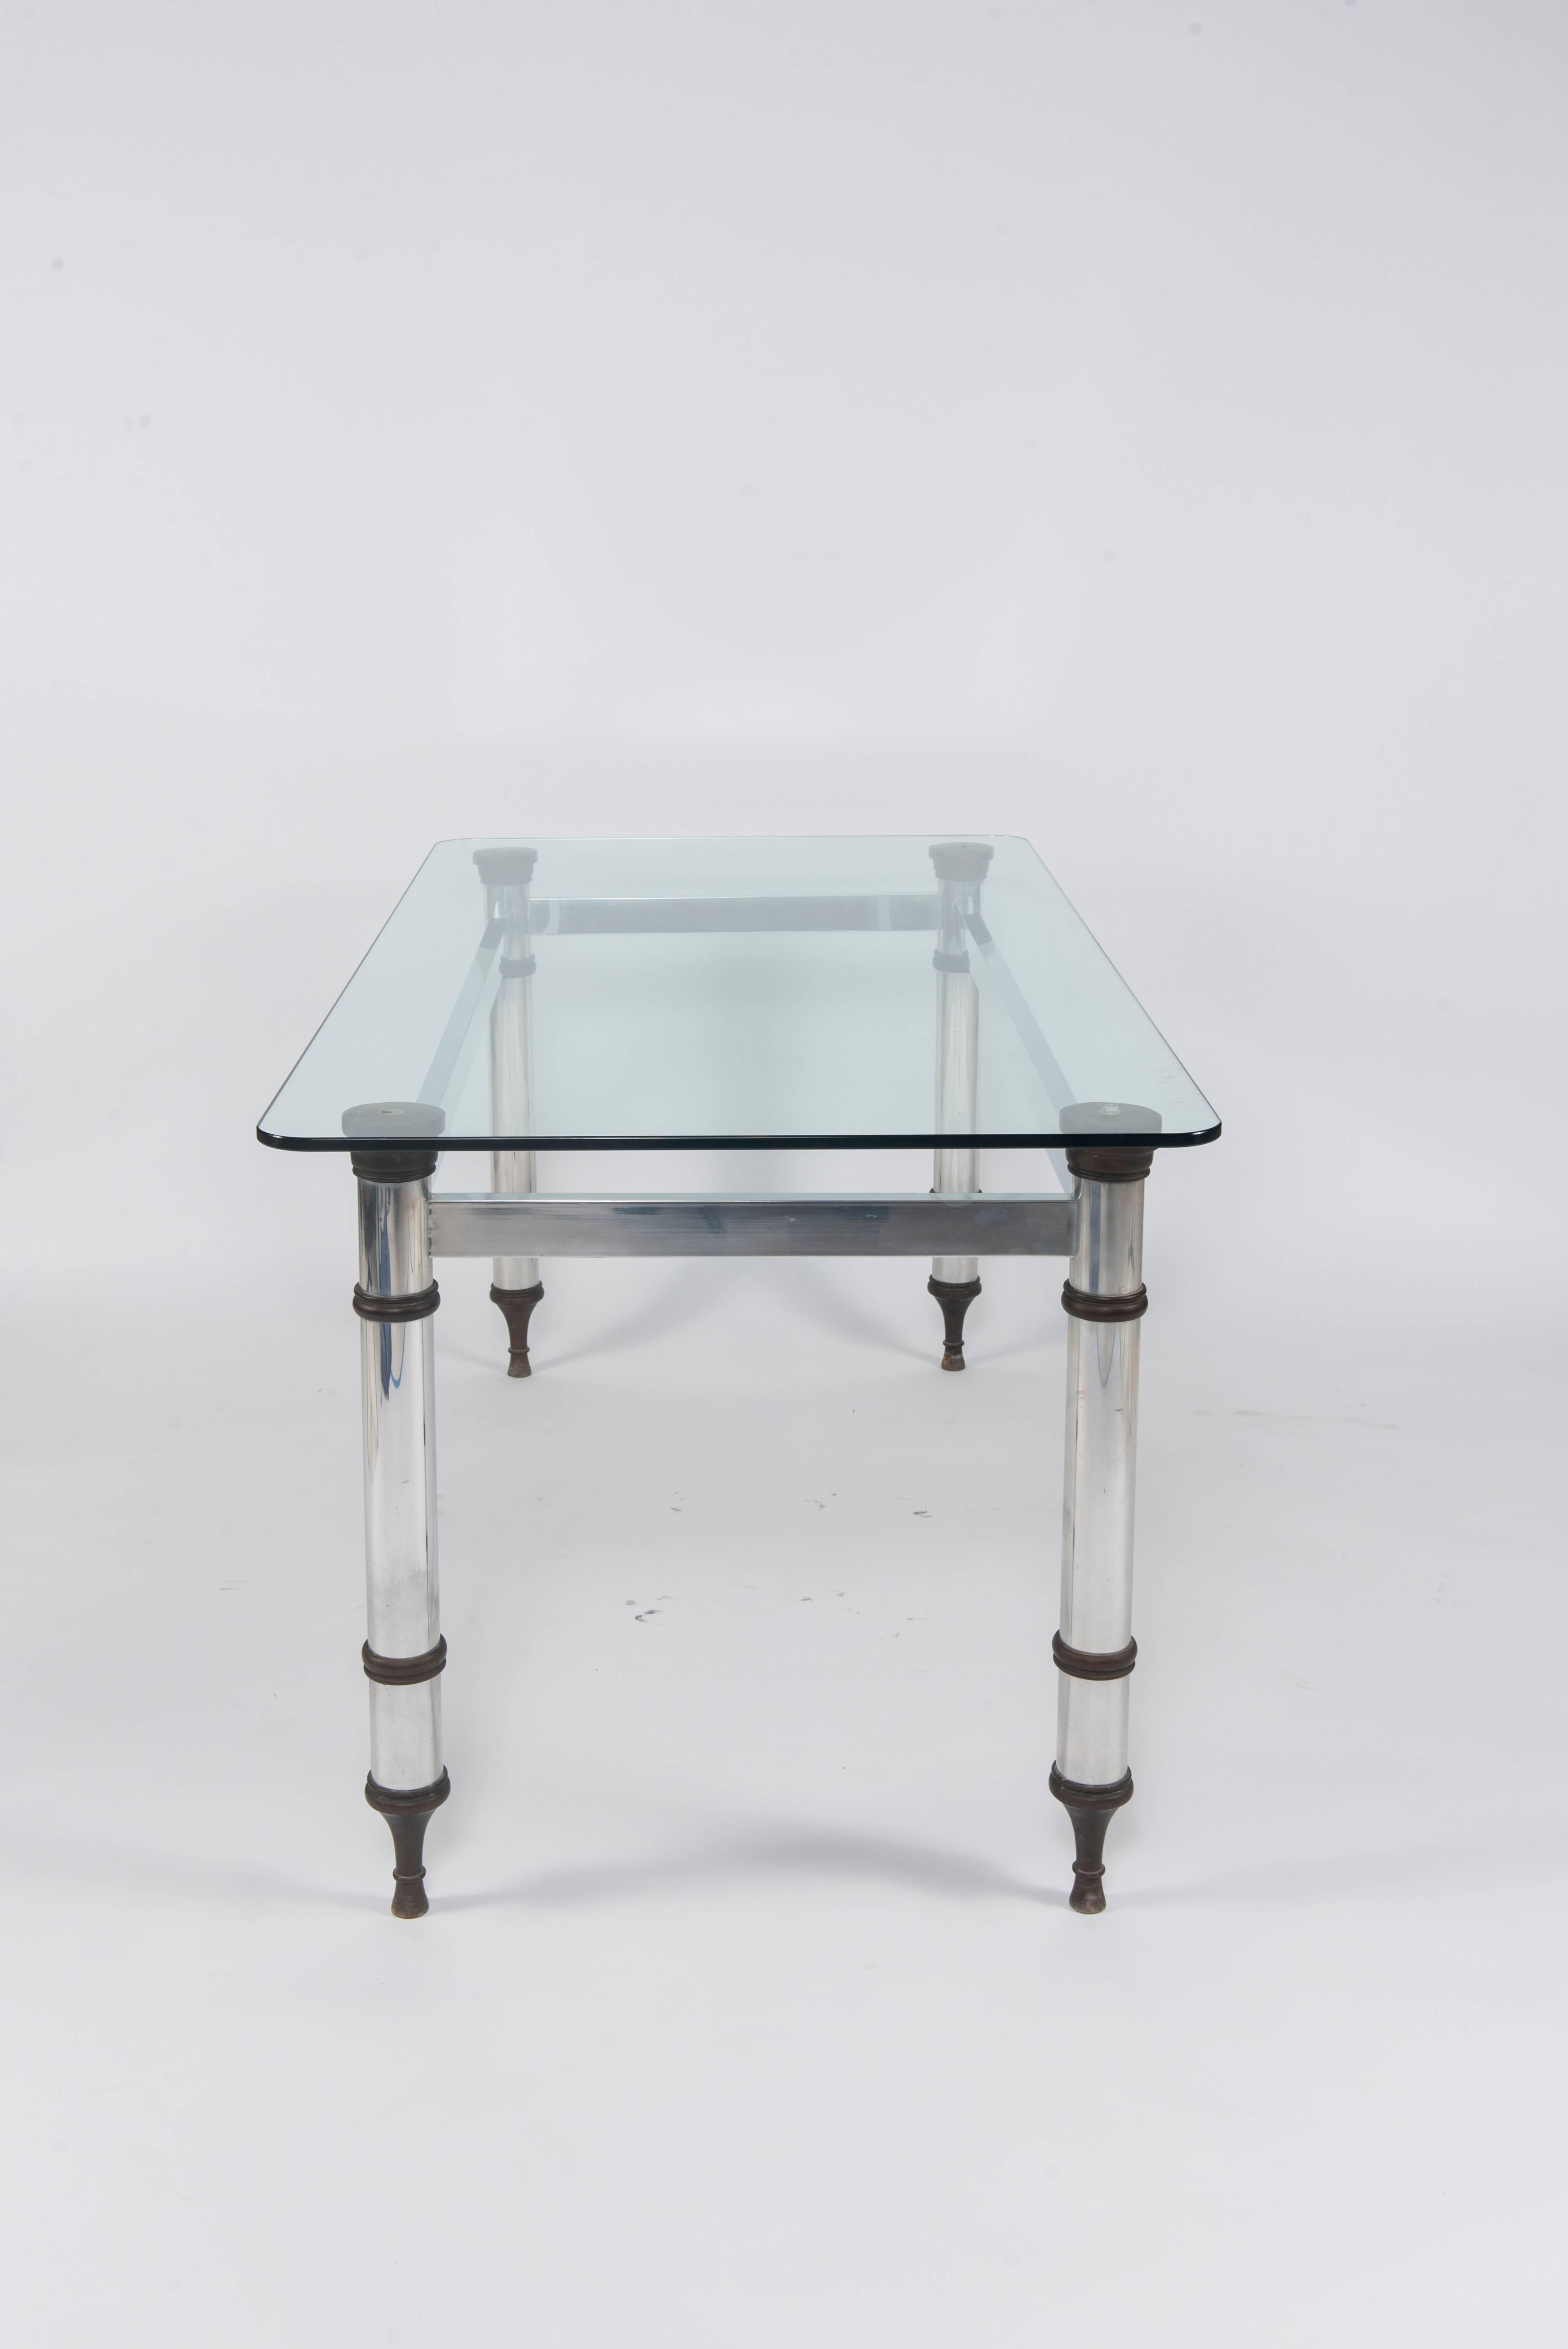 French Maison Jansen style steel and bronze table, circa 1970. New glass top.